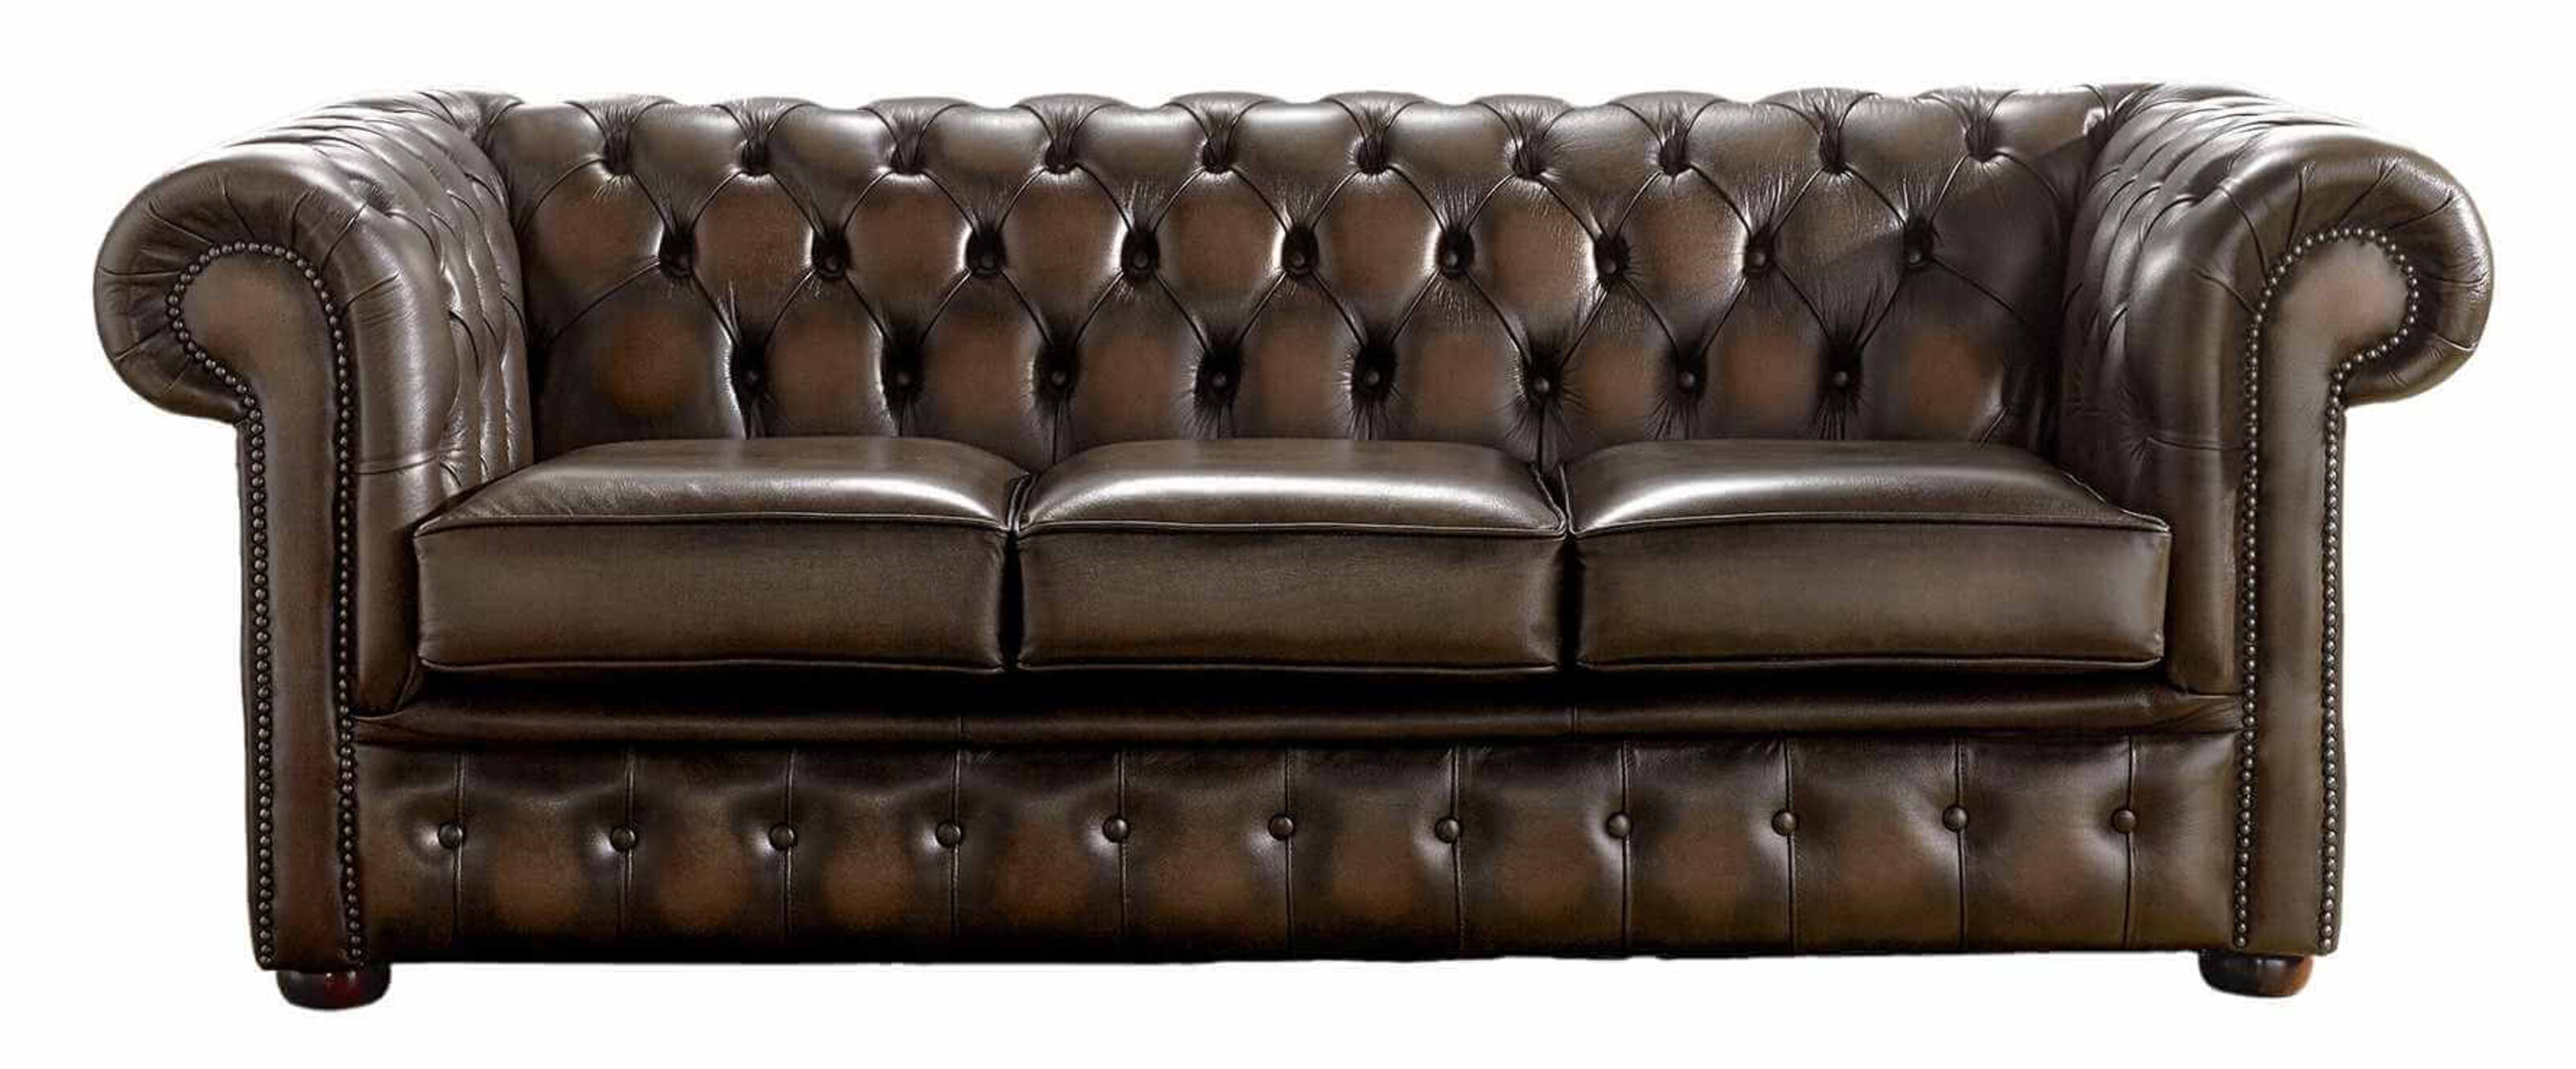 The Sofa That Blends Style and Comfort Seamlessly  %Post Title